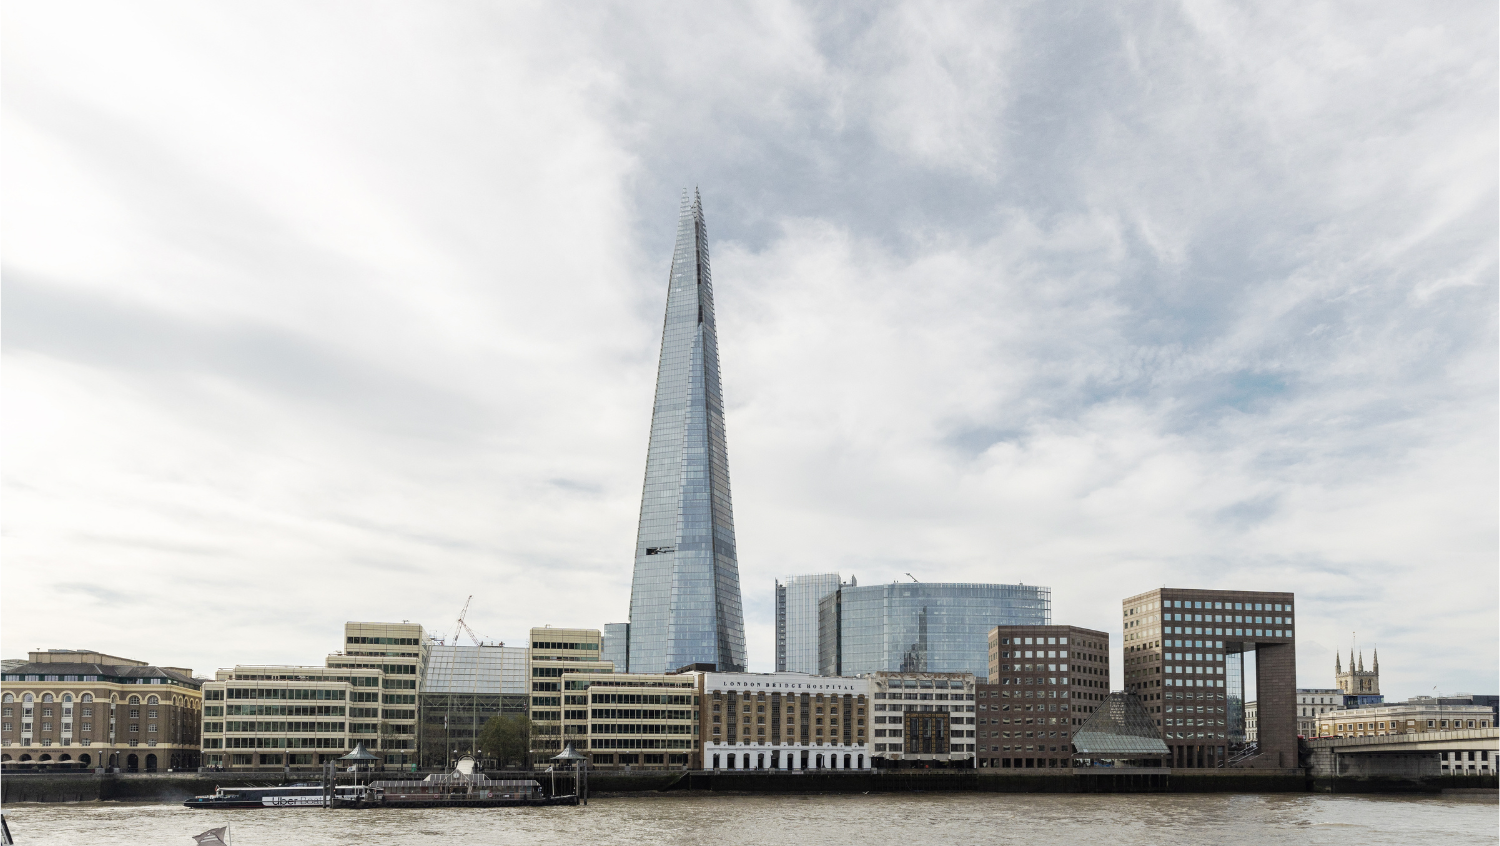 Panorama of London skyscape featuring Shard and Shard place from across the river Thames